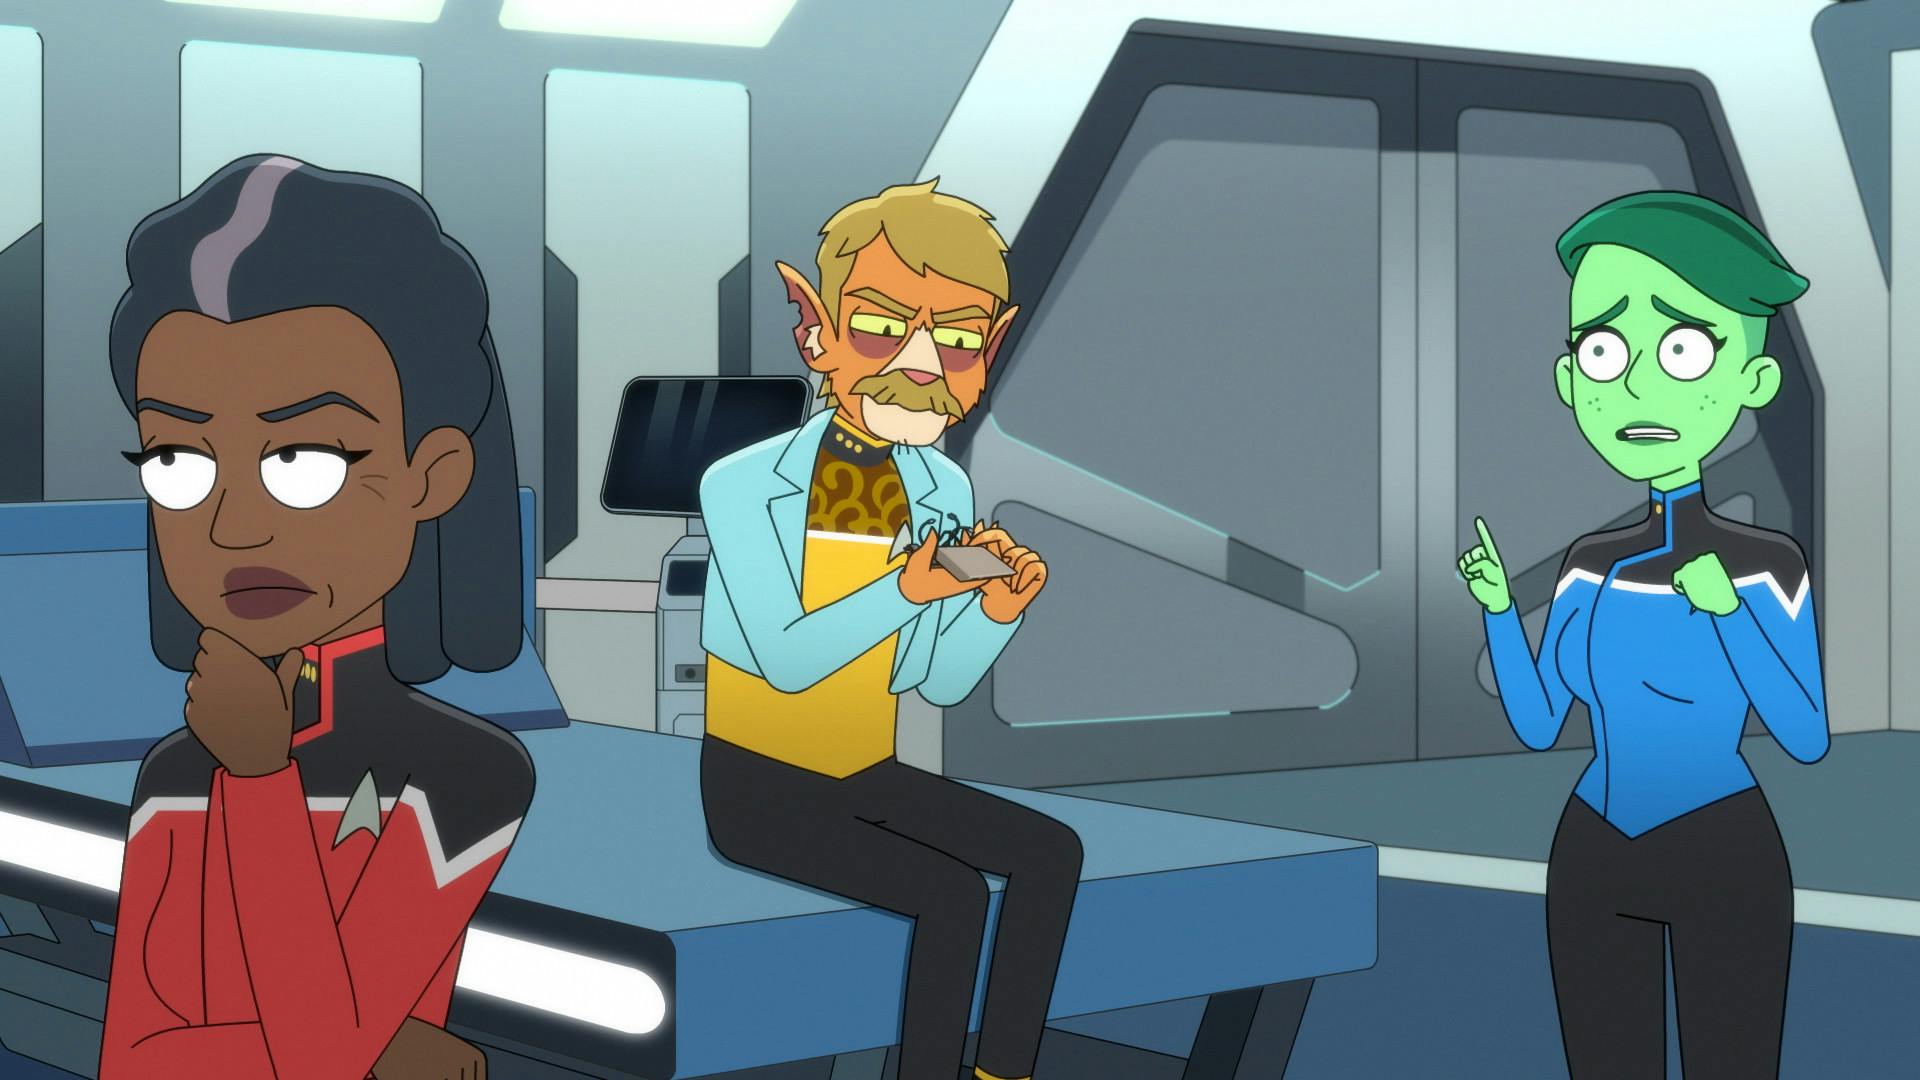 In Sickbay, Captain Carol Freeman, considering the situation, has her backed turned to T'Illups who is sitting on the bio-bed looking over a tricorder while Tendi apprehensively raises her finger to say something to Freeman in 'Twovix'